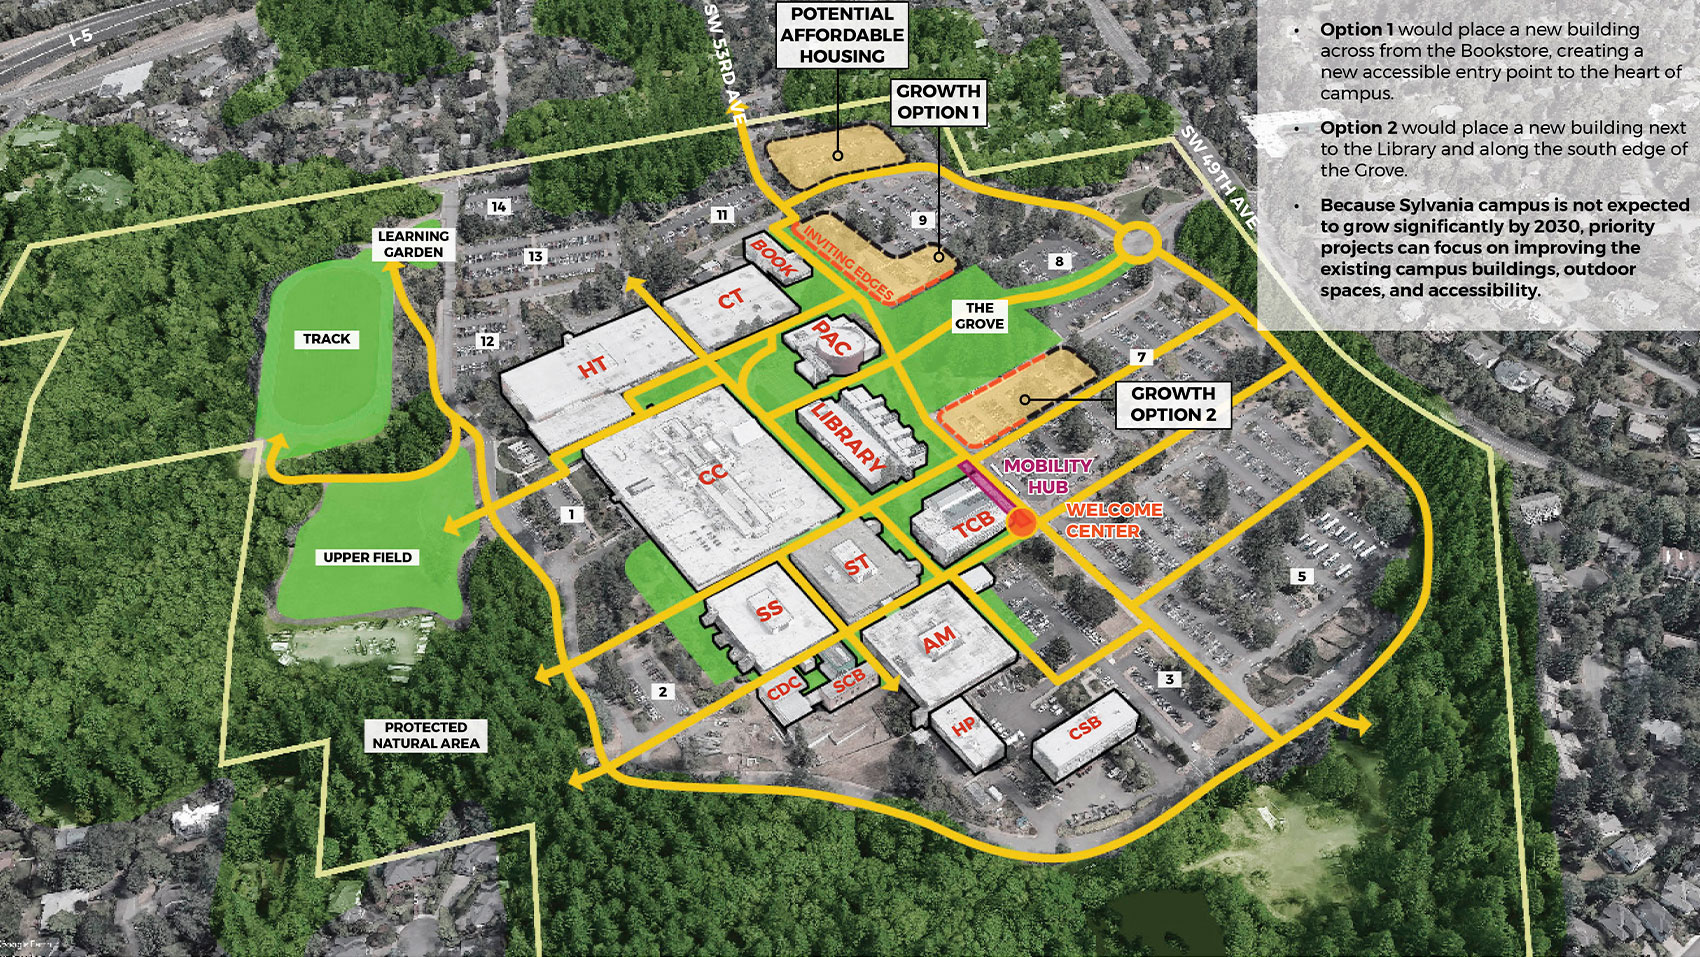 Future Development|The same aerial photograph view as shown in the Campus Planning Concept image. Three areas of the campus have an orange fill with a dashed black outline, indicating future development areas. One area is shown in an L shape, with its long edge facing the Bookstore to the west and the shorter edge facing the Grove to the south. It is labeled “growth option 1”. The second orange area is a rectangle along the south edge of the grove, labeled “growth option 2”. The third is shown at the northeast corner of campus on Parking Lot 10, labeled “potential affordable housing”. Options 1 and 2 have bright red edges where they face the Grove and parts of the existing campus, labeled “inviting edges”. An orange dot and purple rectangle are shown at the edge of TCB at the existing shuttle stop, labeled “Welcome Center” and “Mobility Hub”. At the top right of the image, a white box contains text describing each development area.